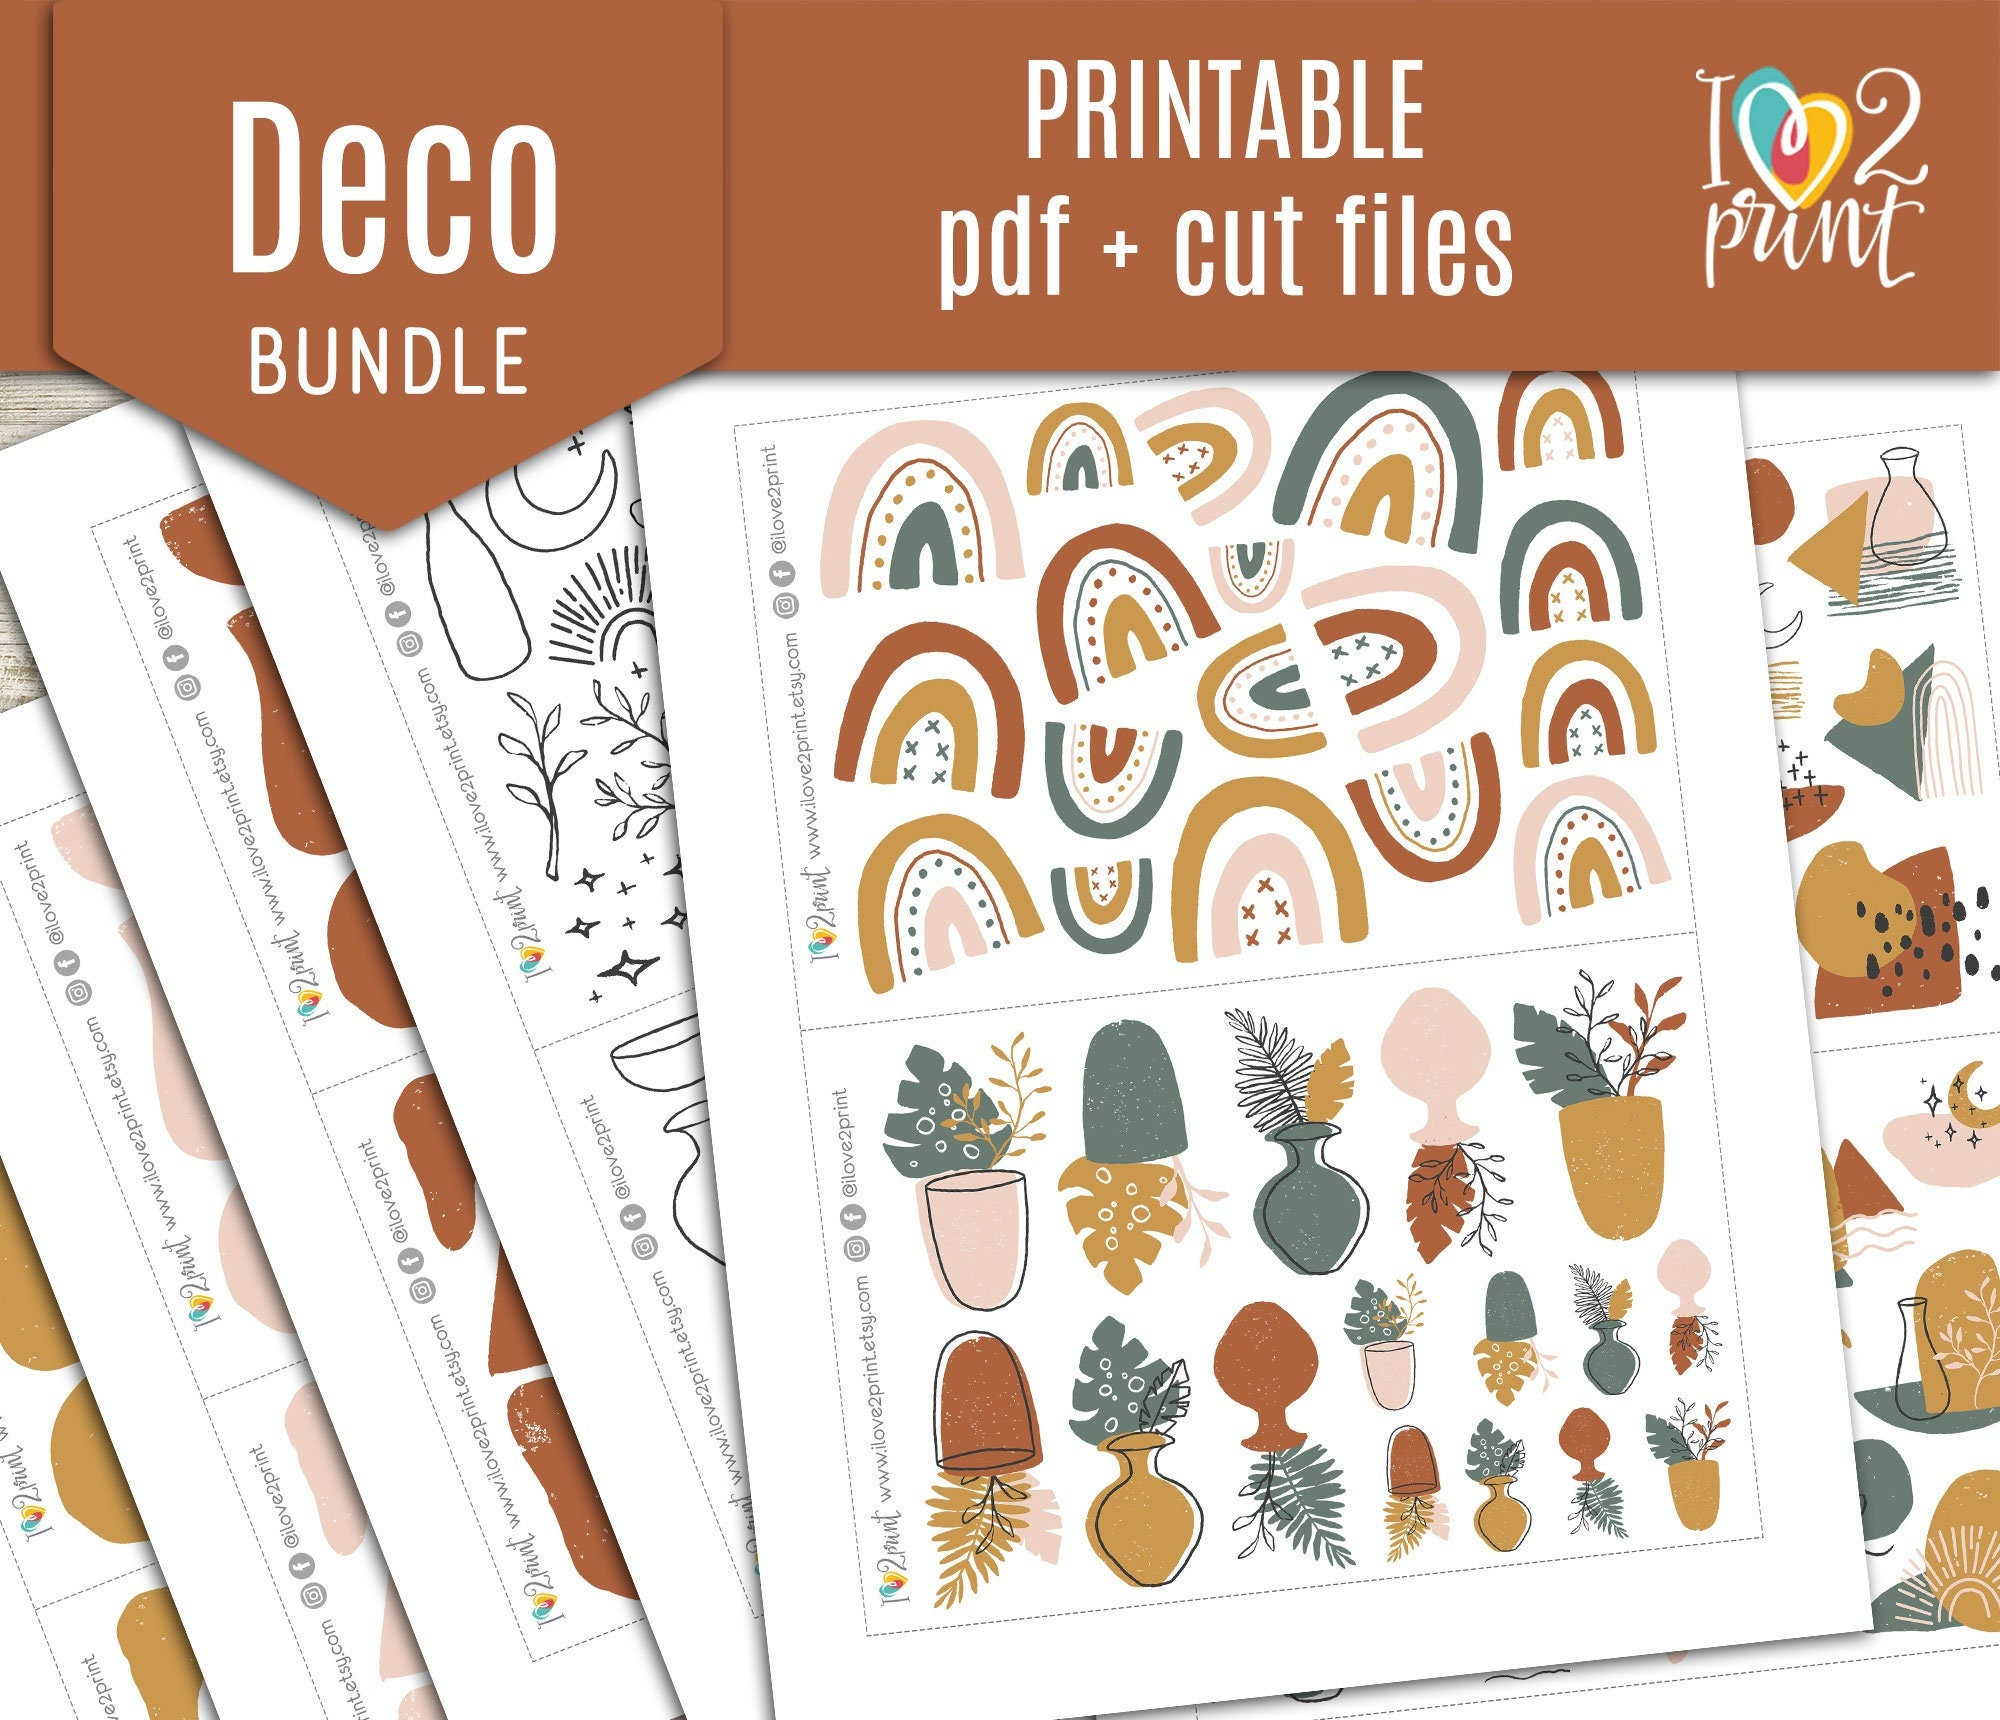 Earthy tone abstract Shape Stickers, Neutral Planner Stickers, Colorful  shape Stickers, Bullet Journal Stickers